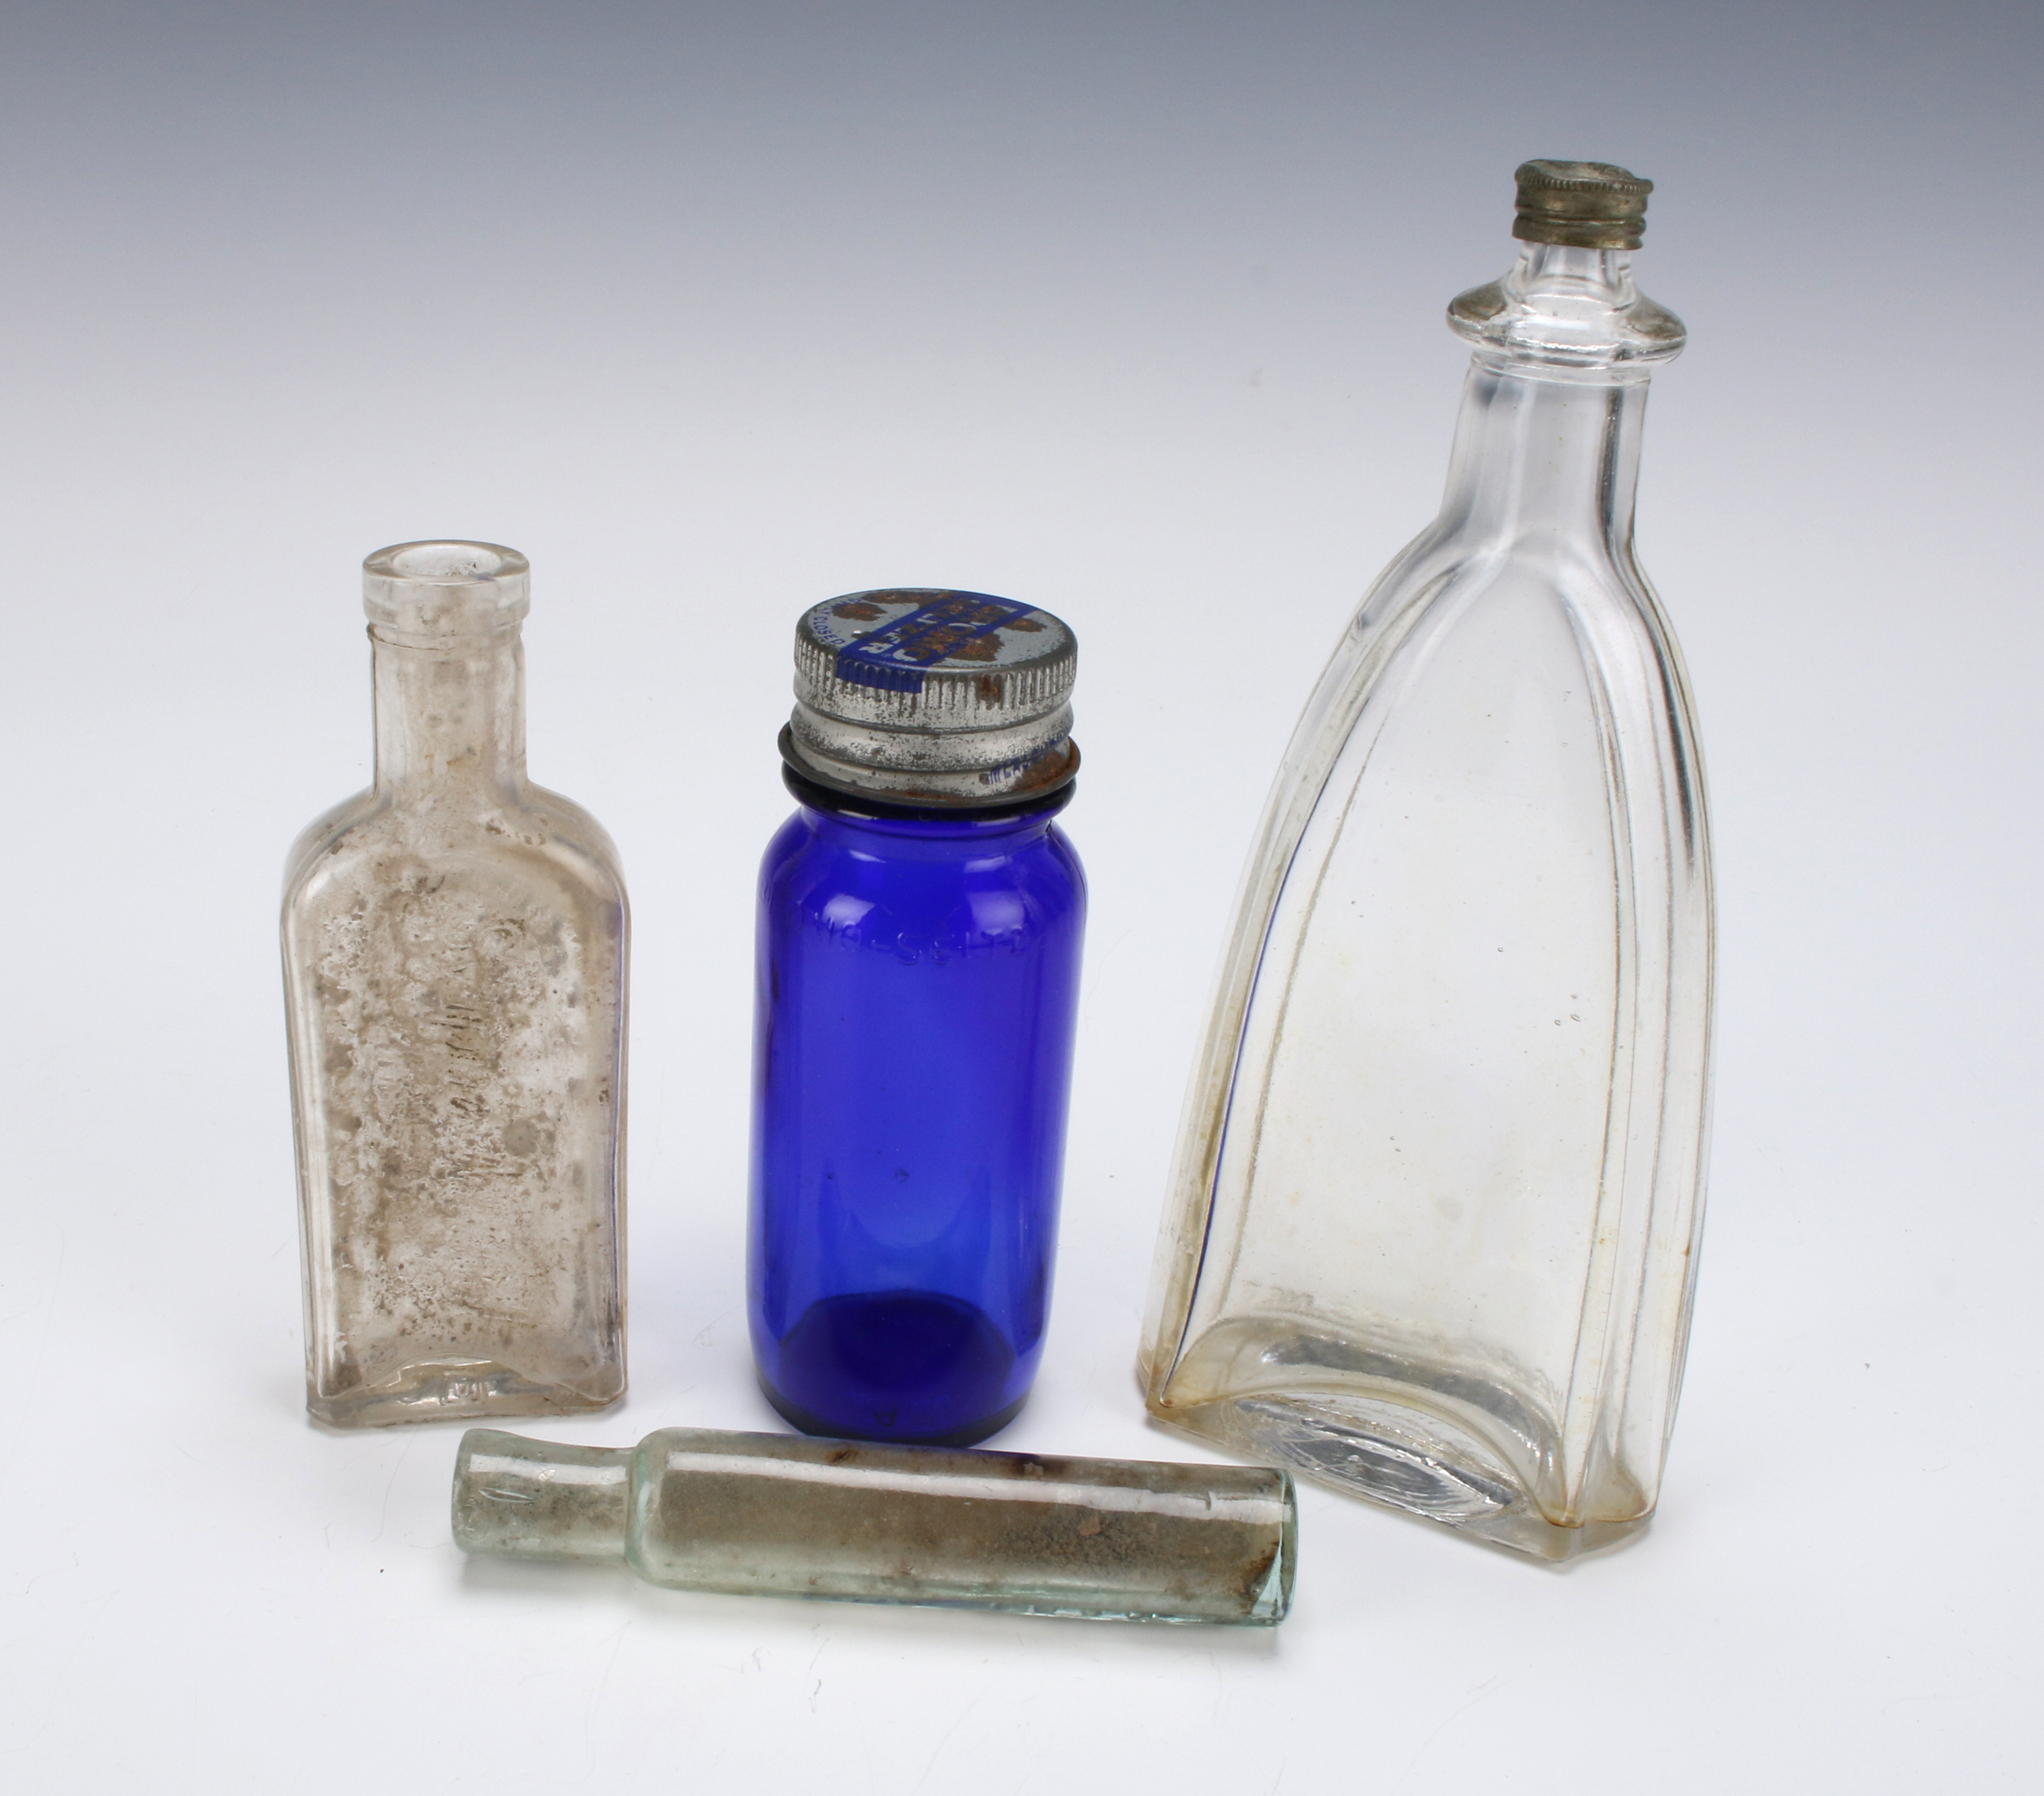 Vintage Apothecary Bottles & Vial image 1